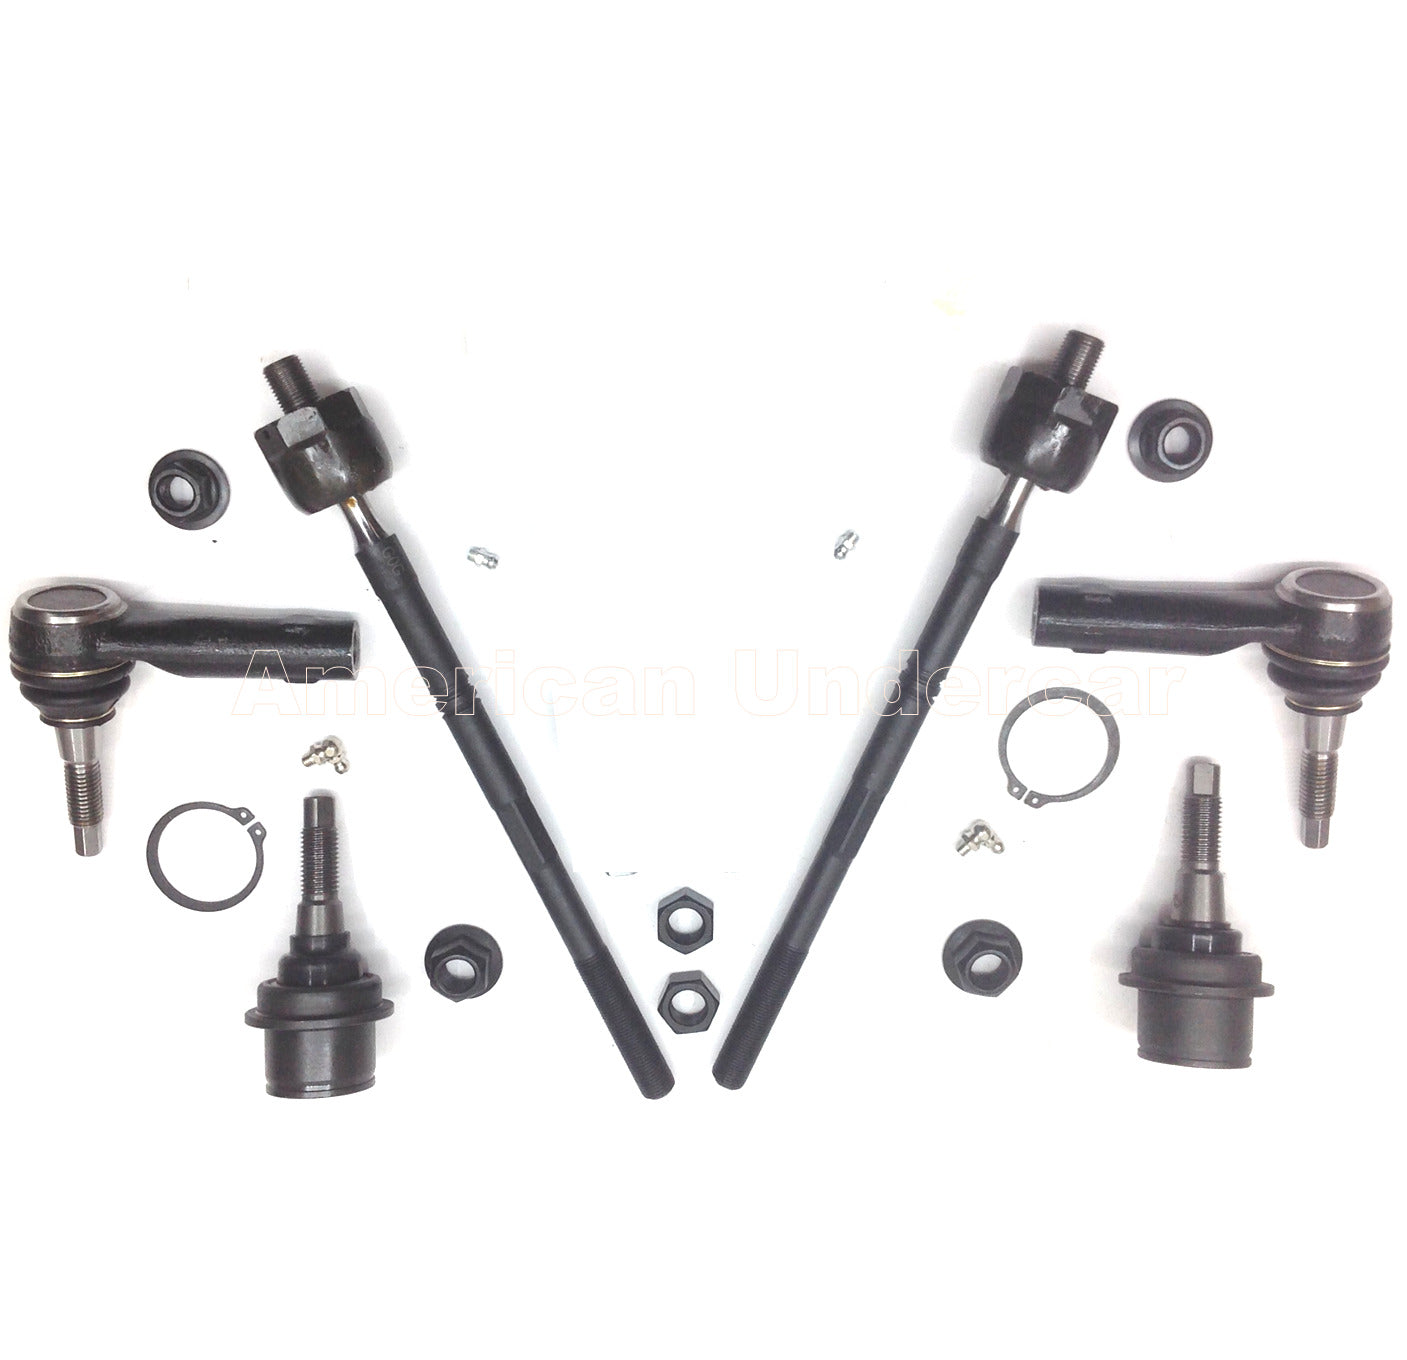 Lifetime Lower Ball Joints Tie Rod Steering Kit for 2009-2014 Ford F150 4x4